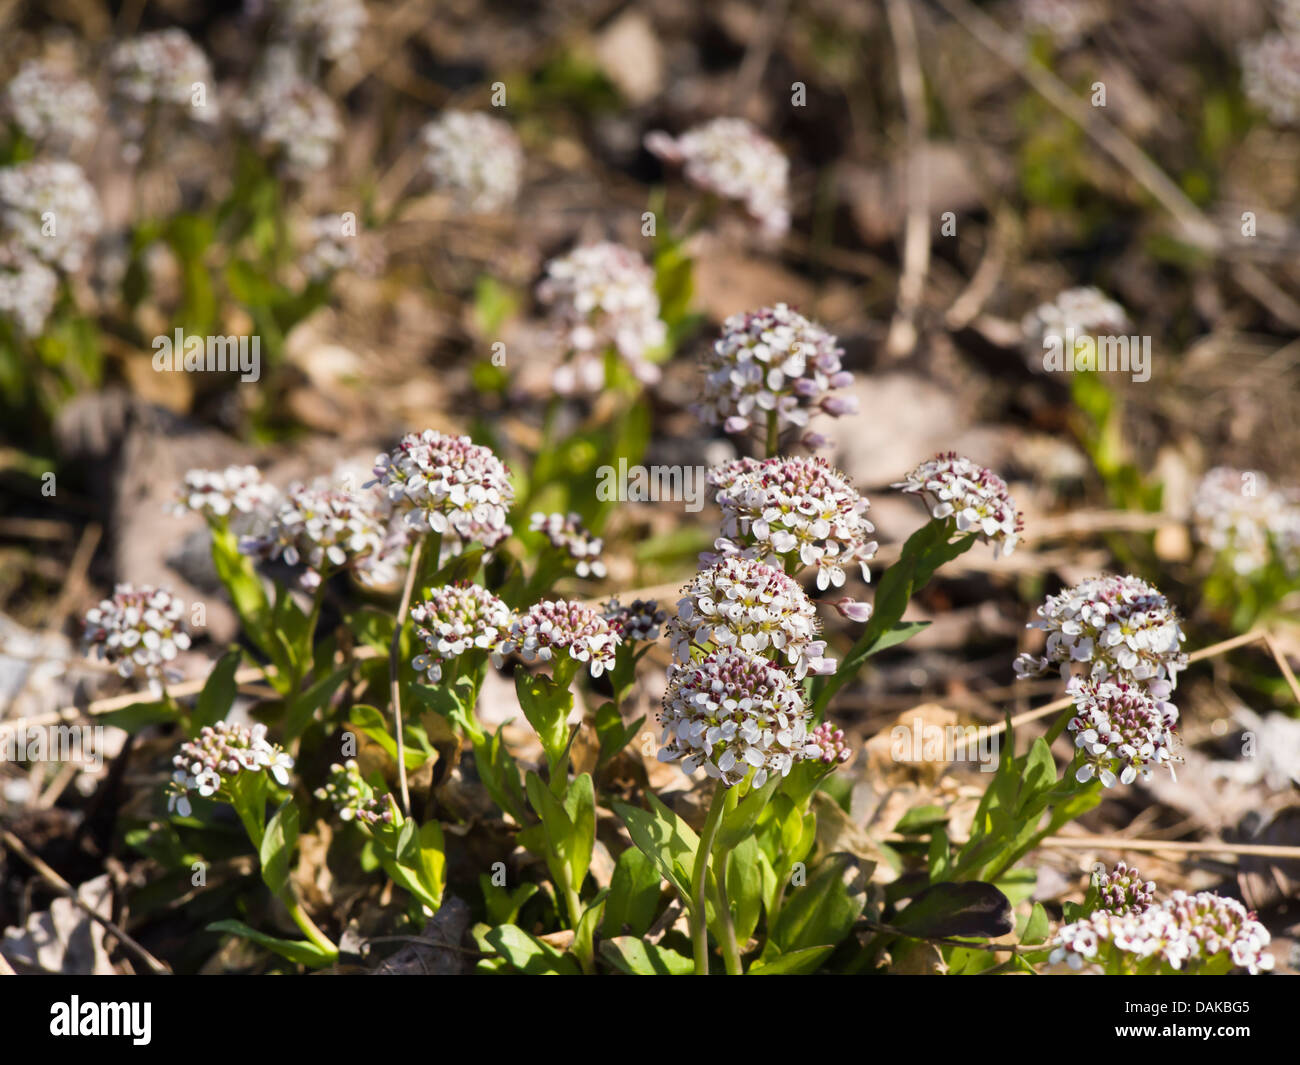 Alpine Pennycress Thlaspi caerulescens, also known as Alpine Pennygrass , common in Norway in early spring Stock Photo